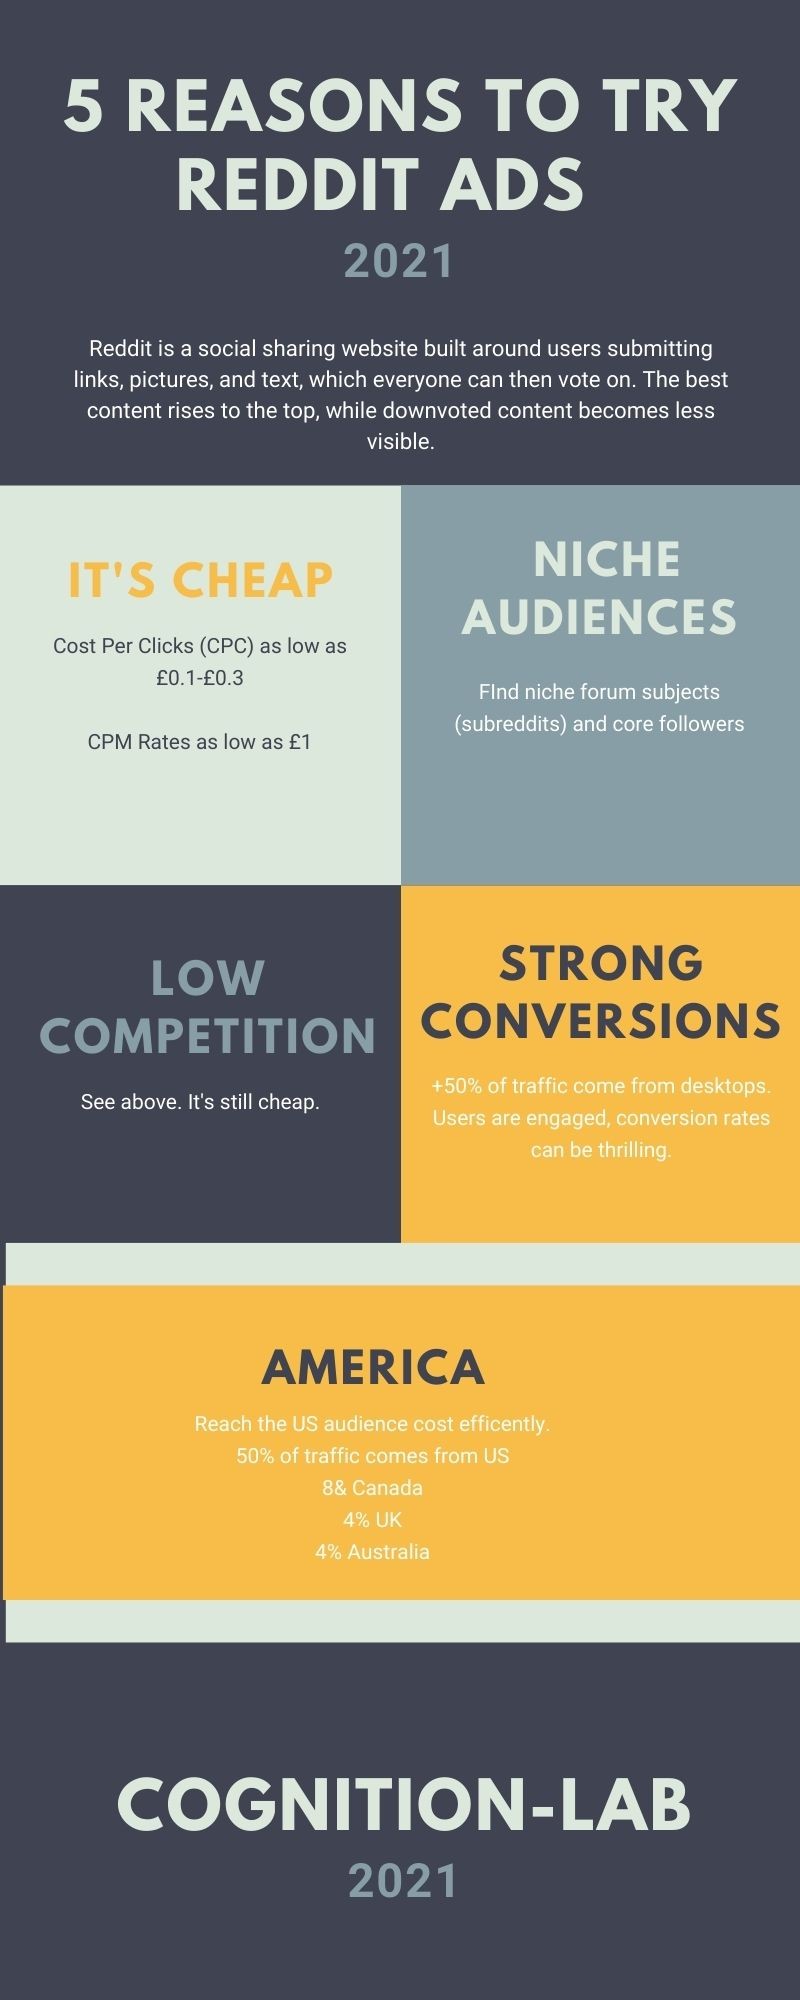 Reddit Ad Infographic - 5 Reasons To Try Reddit Ads in 2021 by CognitionLab